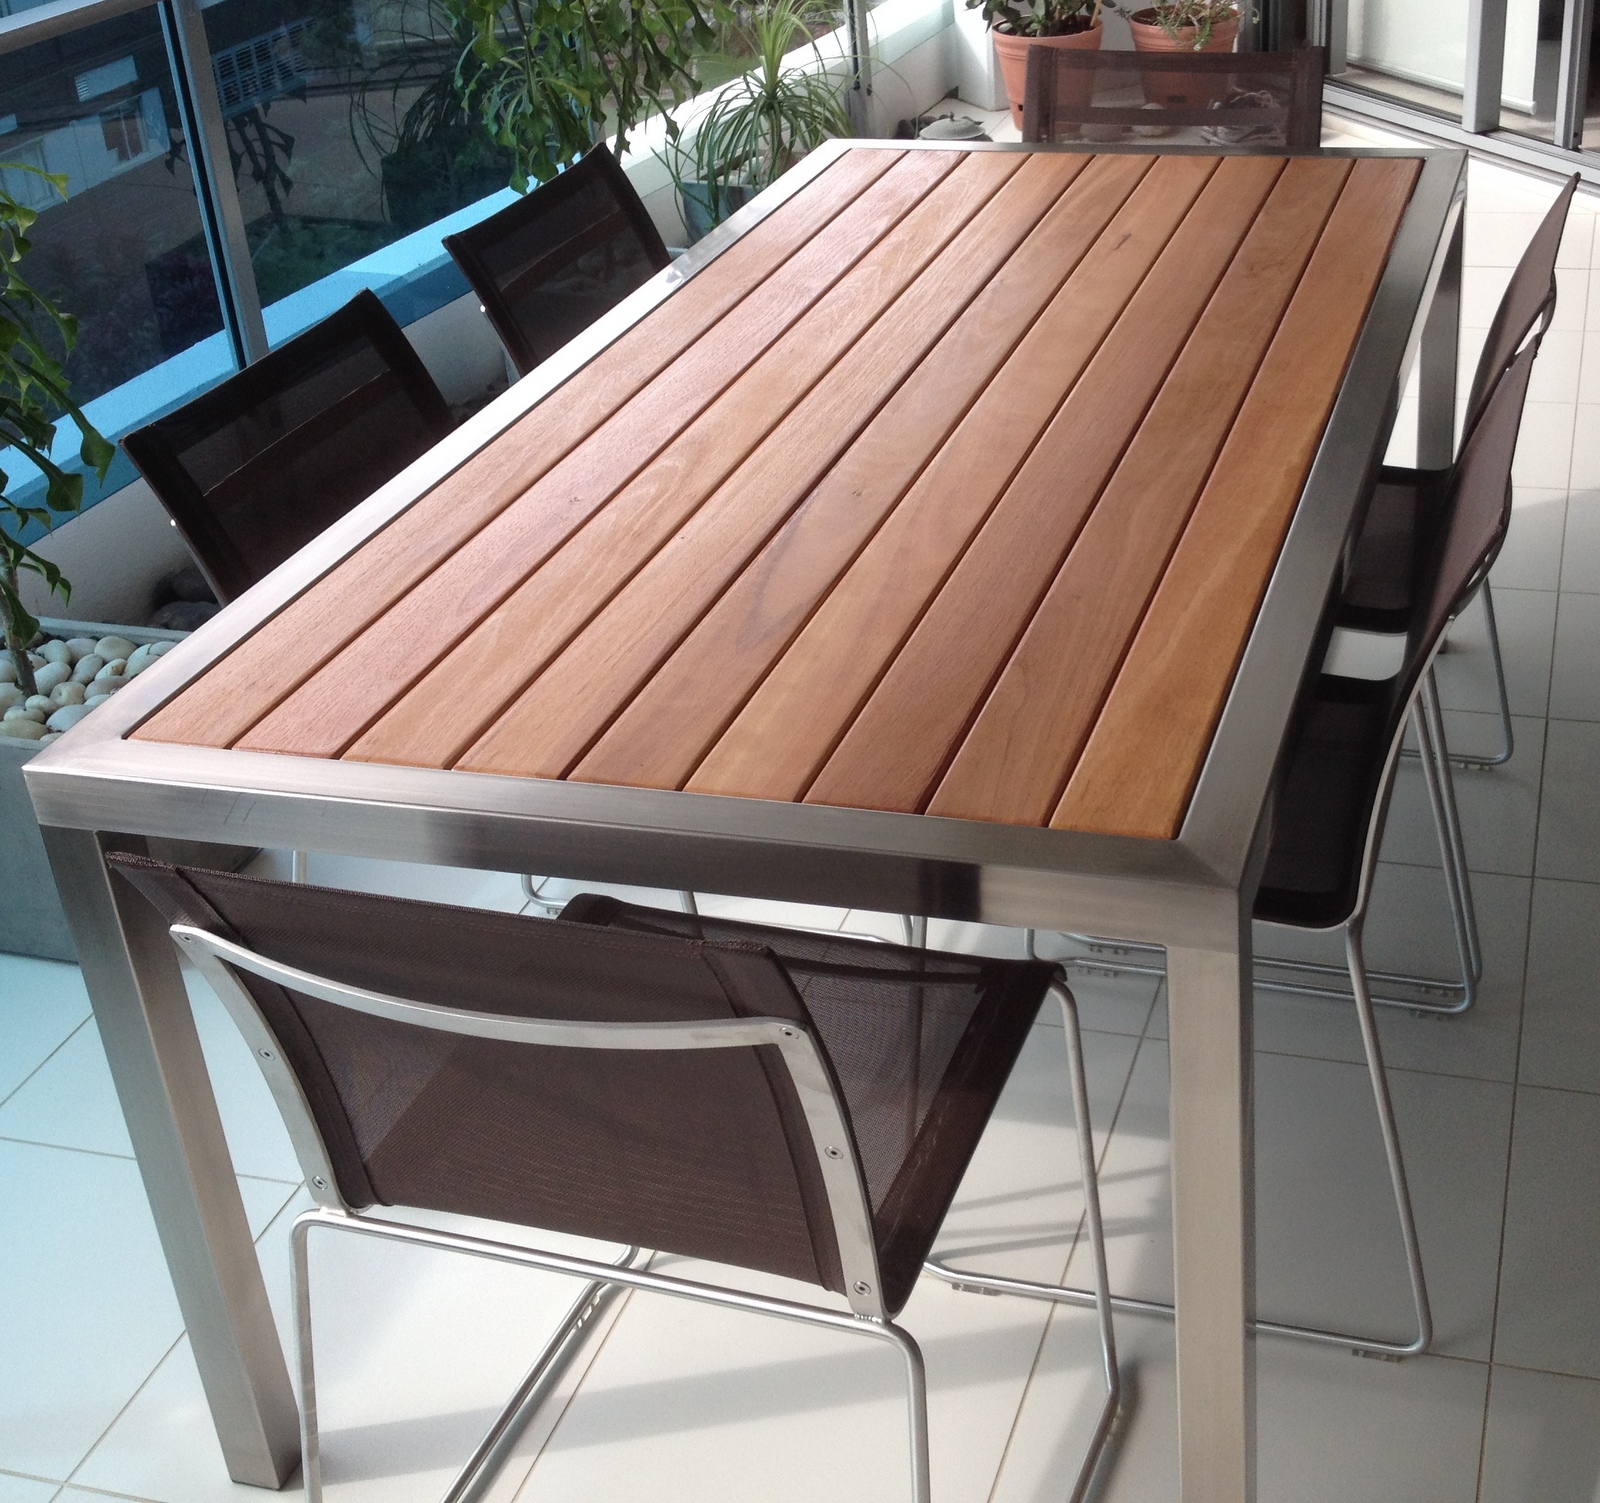 outdoor dining table bench photo - 7